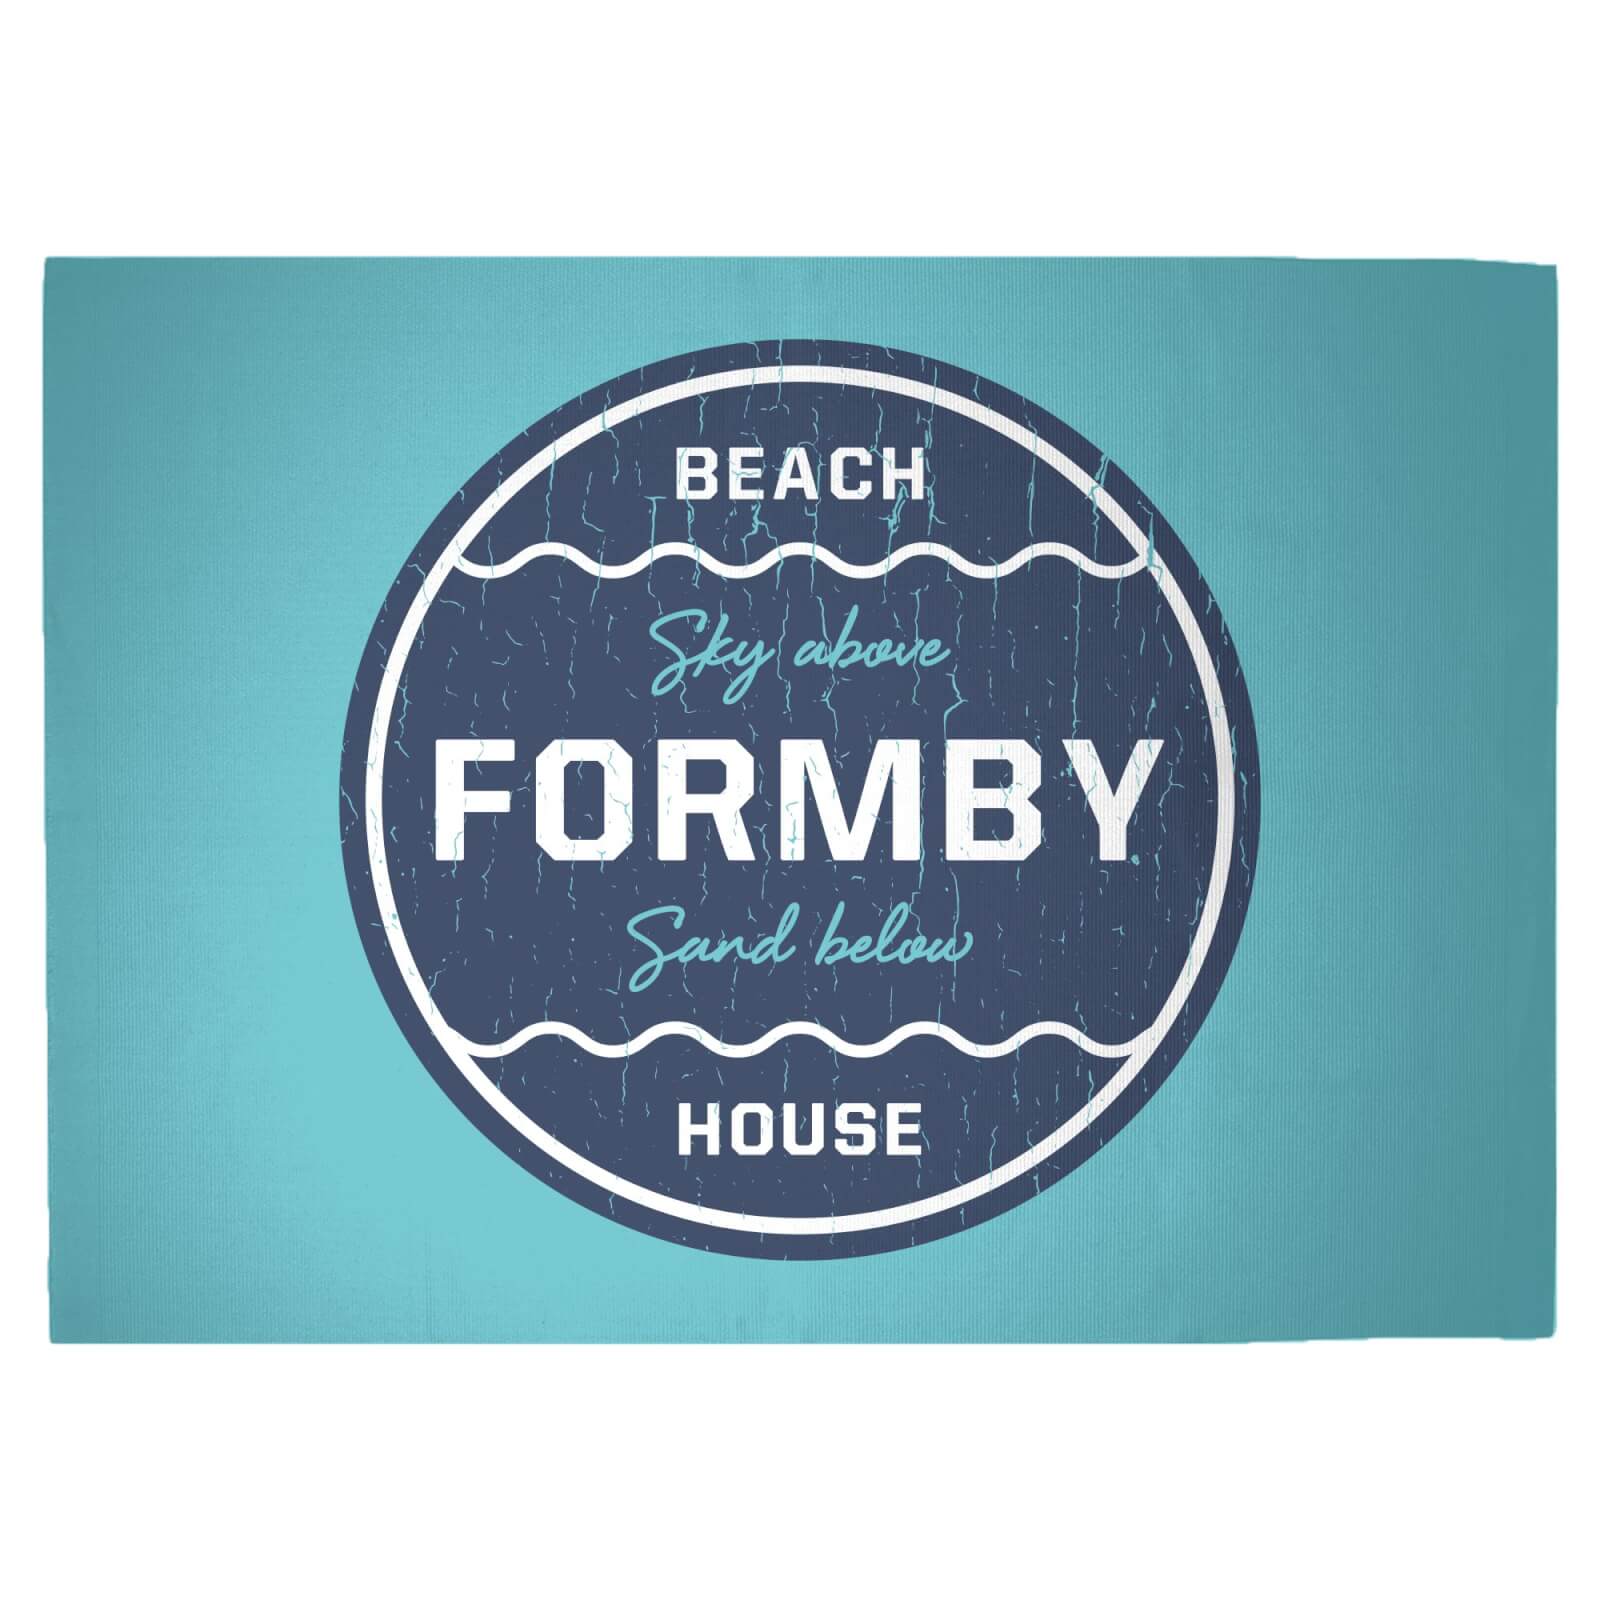 Formby Beach Badge Woven Rug - Large